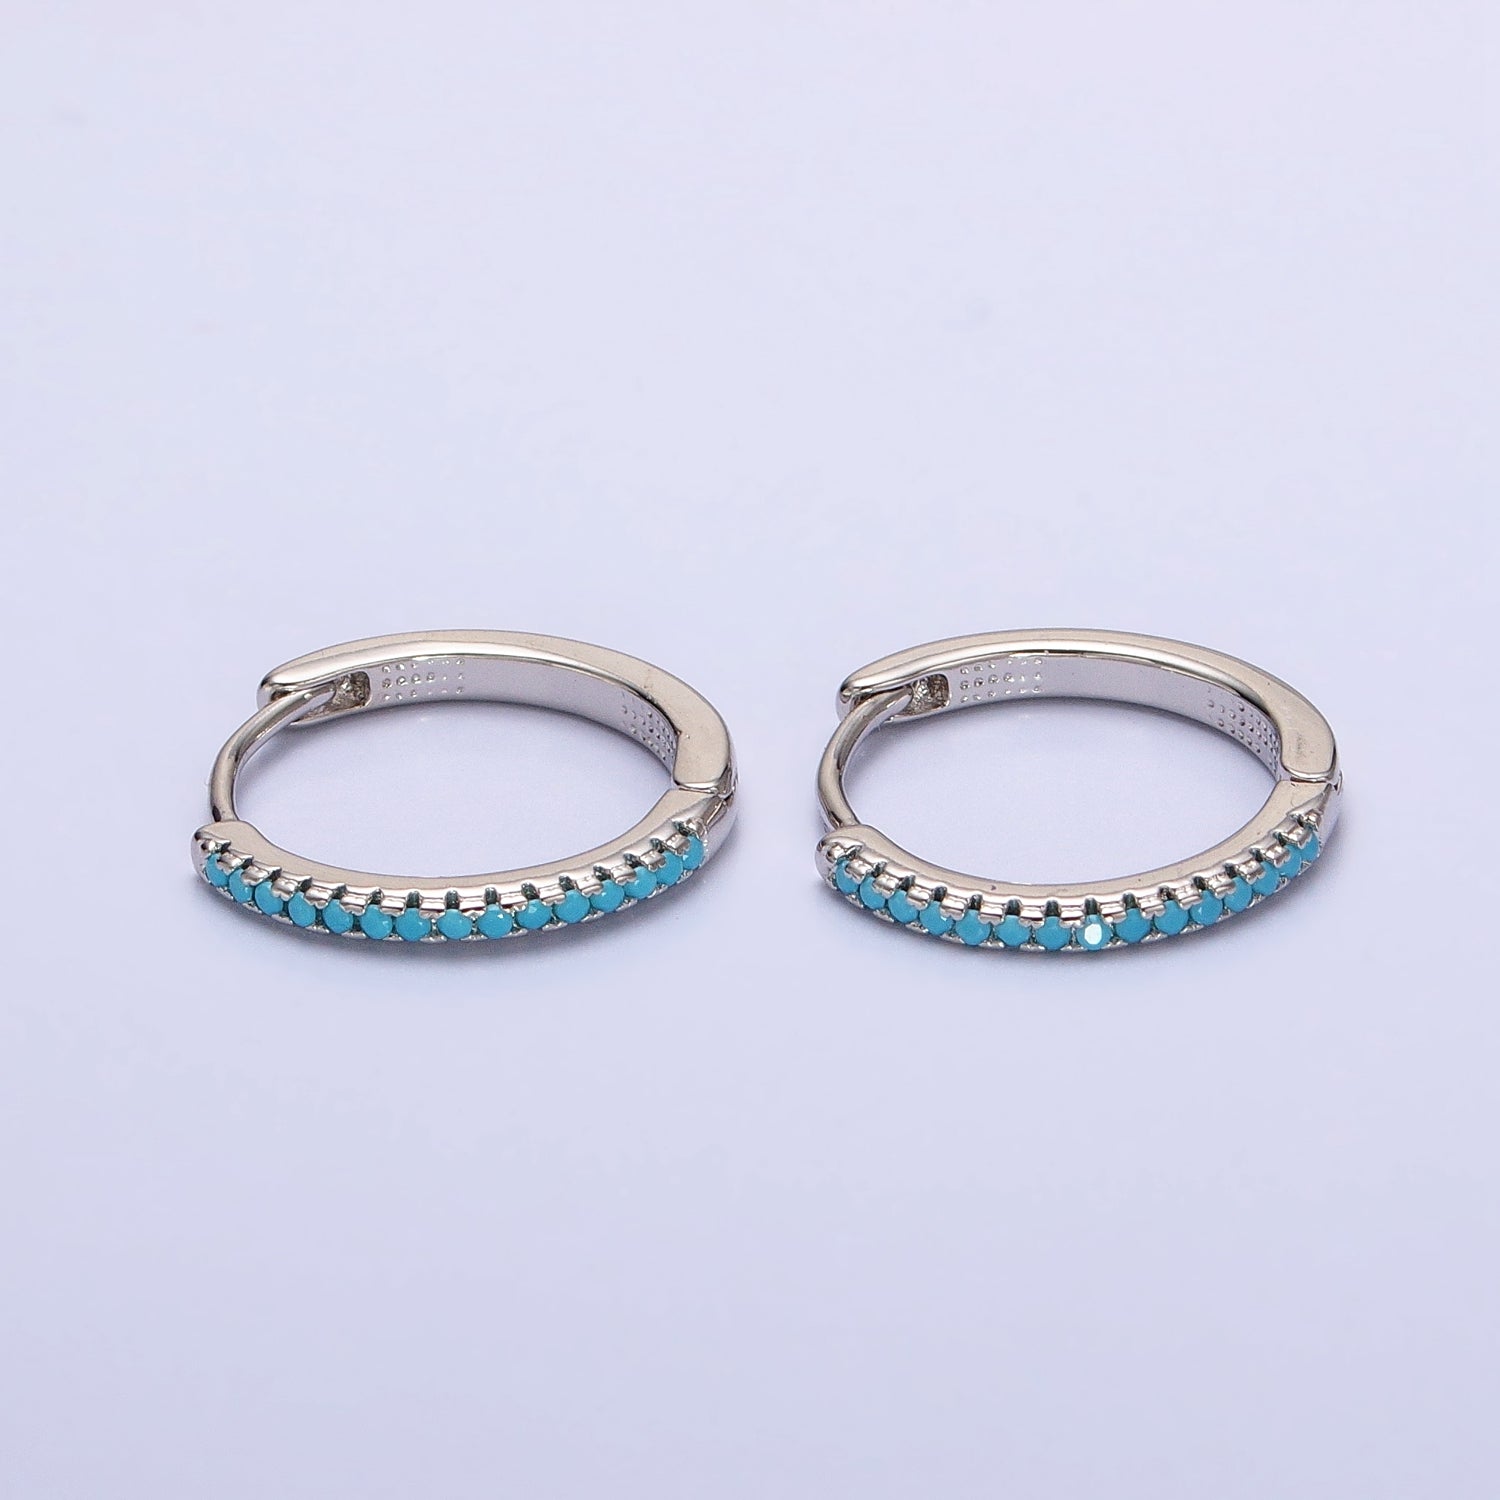 Dainty Pave Cz Hoop Earring with Clear Turquoise Multi Color Rainbow Cz Stone 17mm AD1349 AD1350 AD1352 AD1353